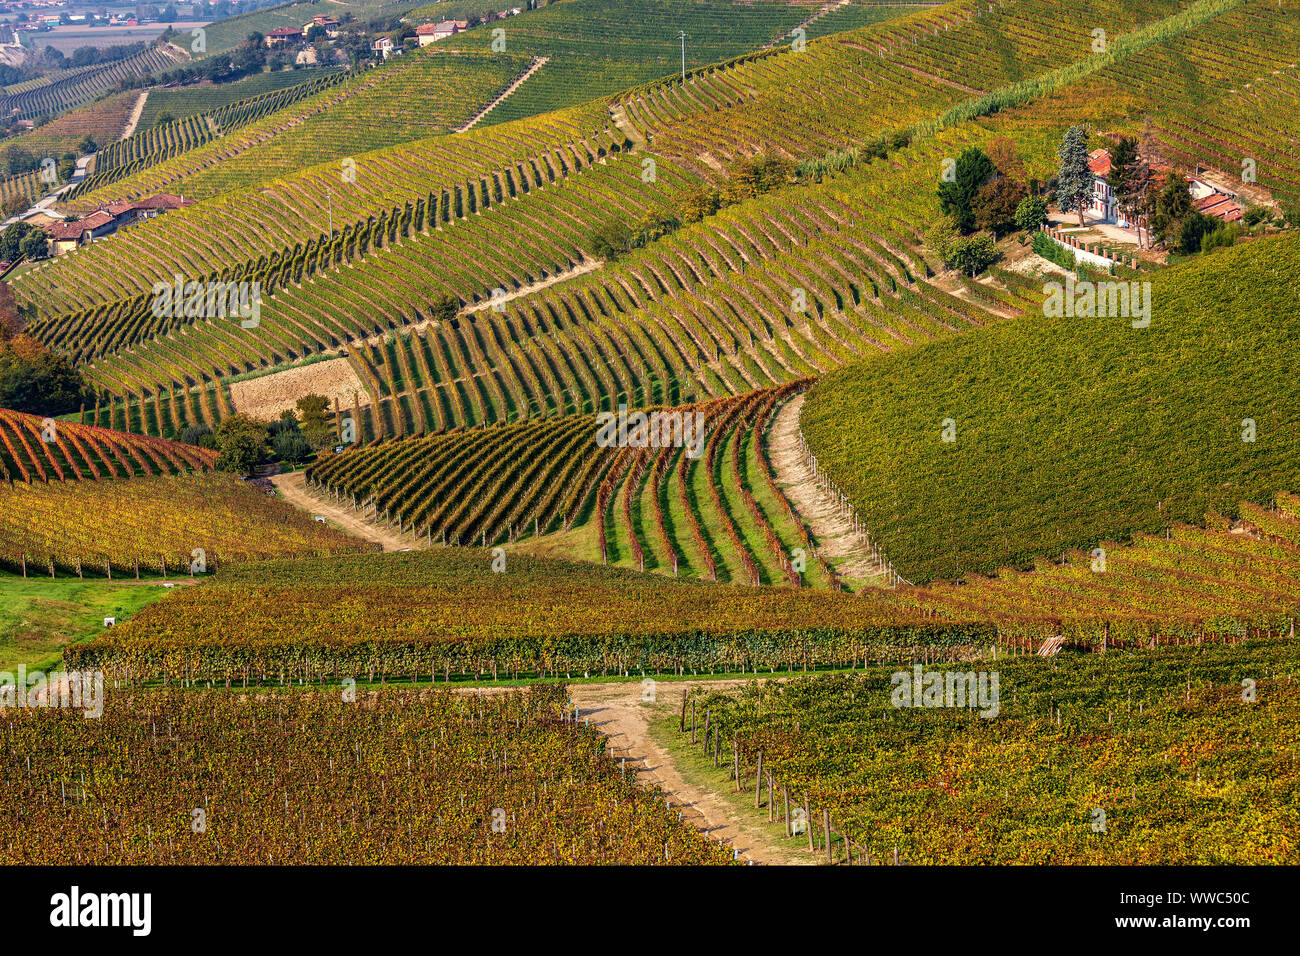 View of hills and colorful autumnal vineyards near Barbaresco in Piedmont, Northern Italy. Stock Photo